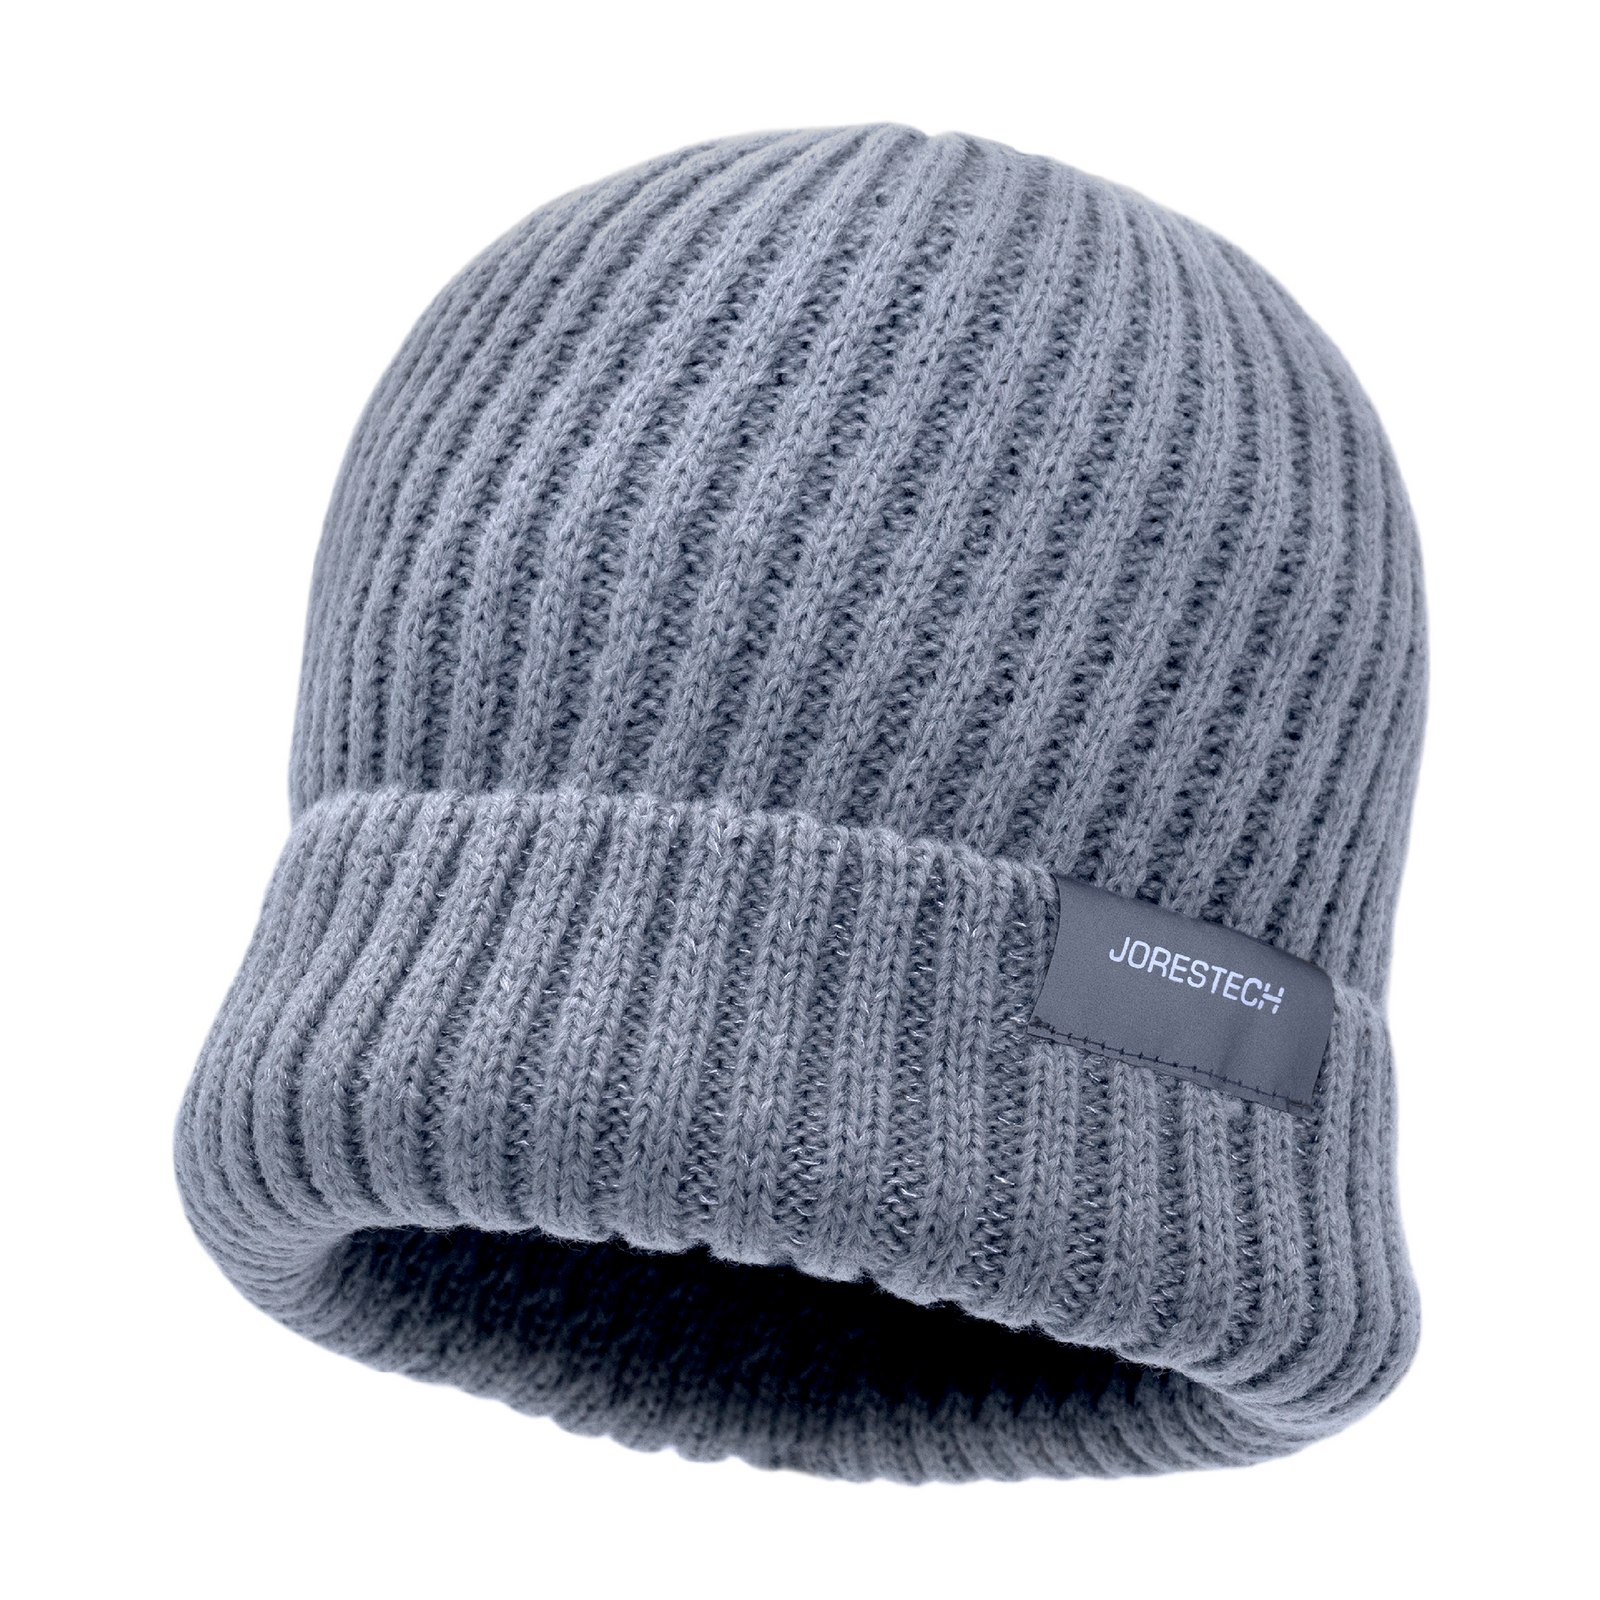 Gray winter beanie hat with reflective stitching